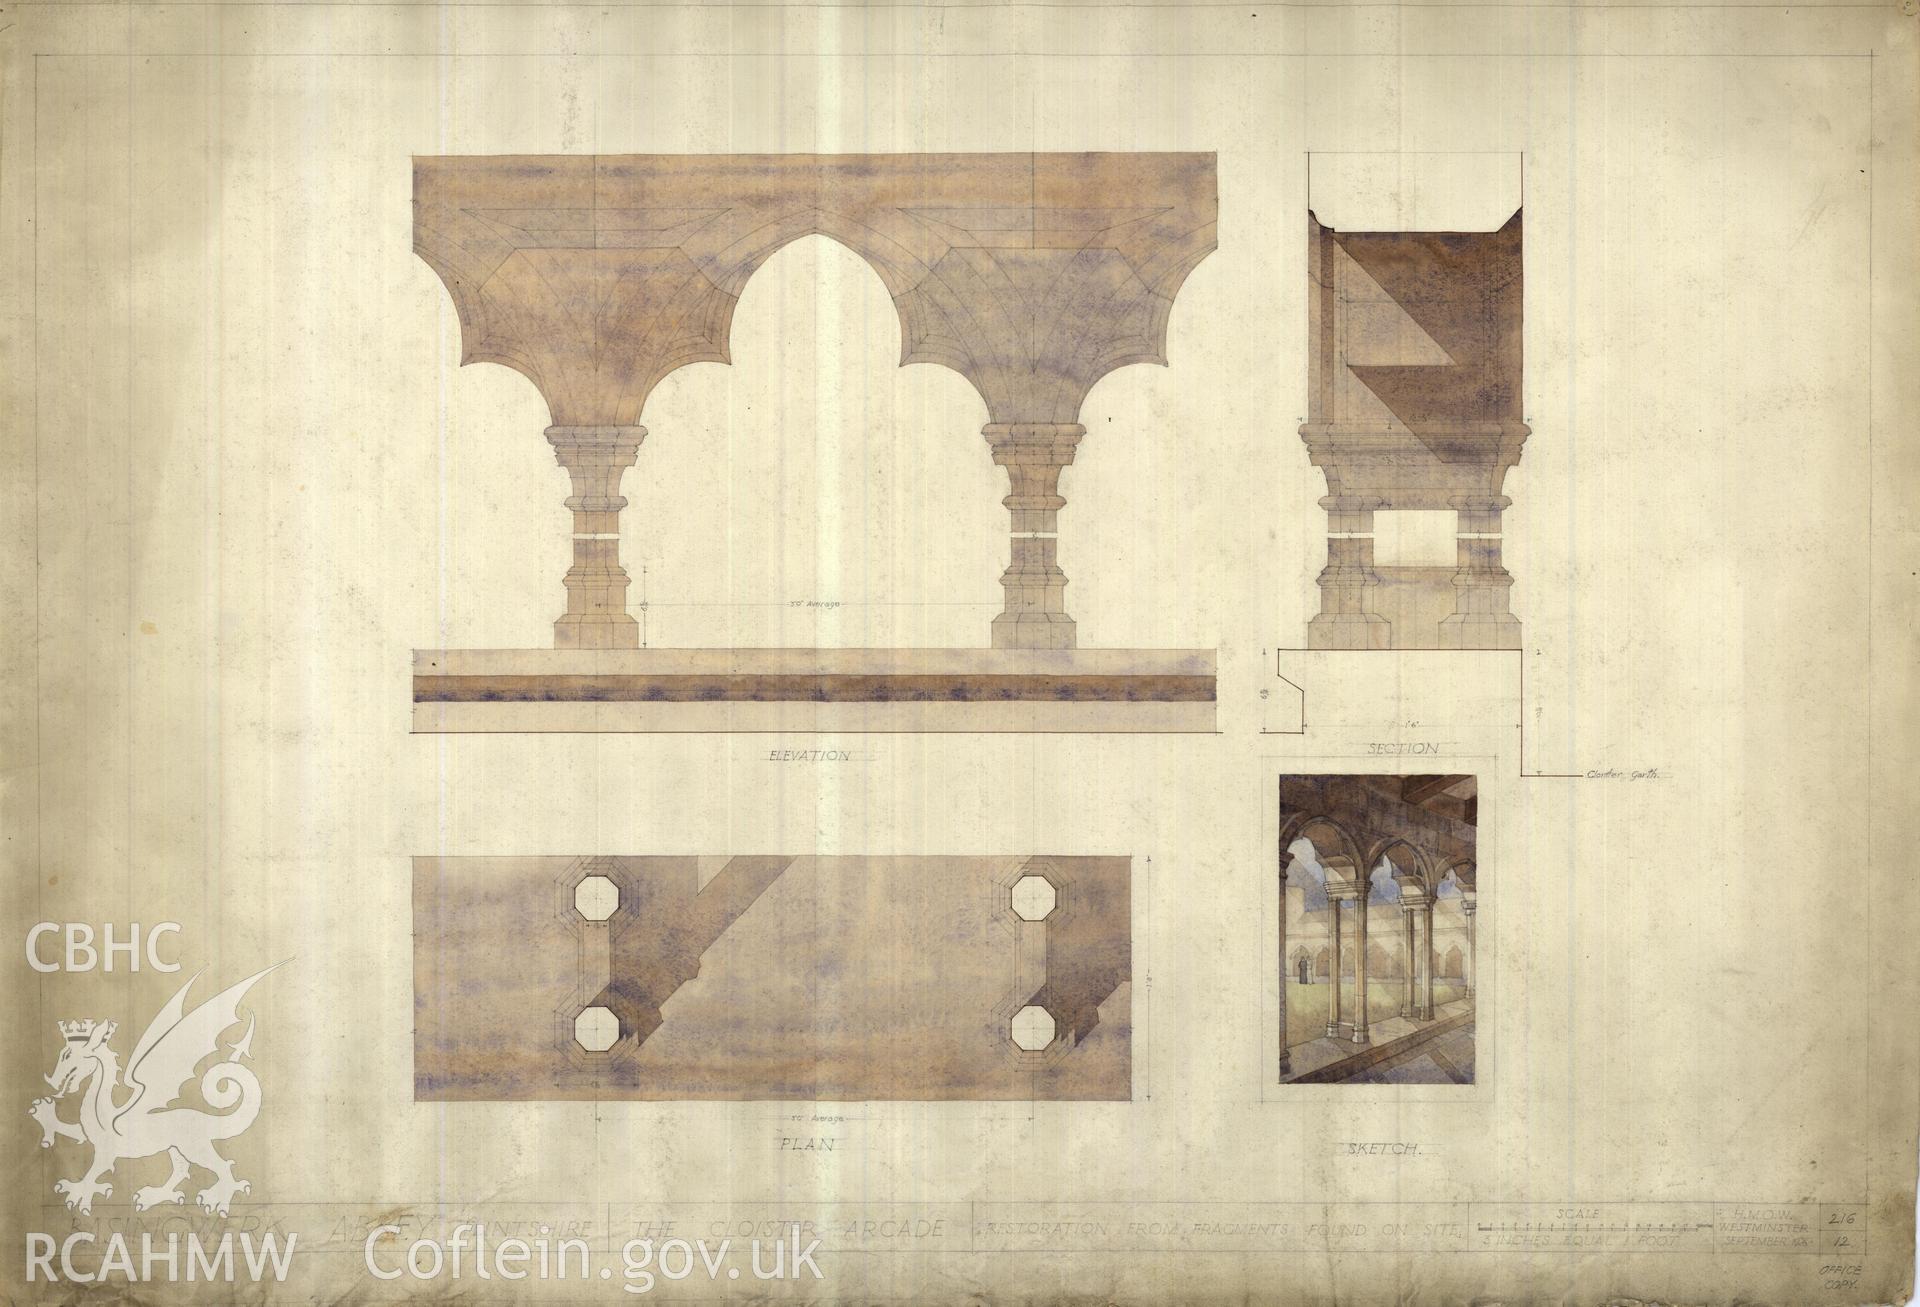 Cadw guardianship monument drawing of Basingwerk. Cloister arcade,rest. from fragments. Cadw Ref. No:216/12. Scale 1:4.